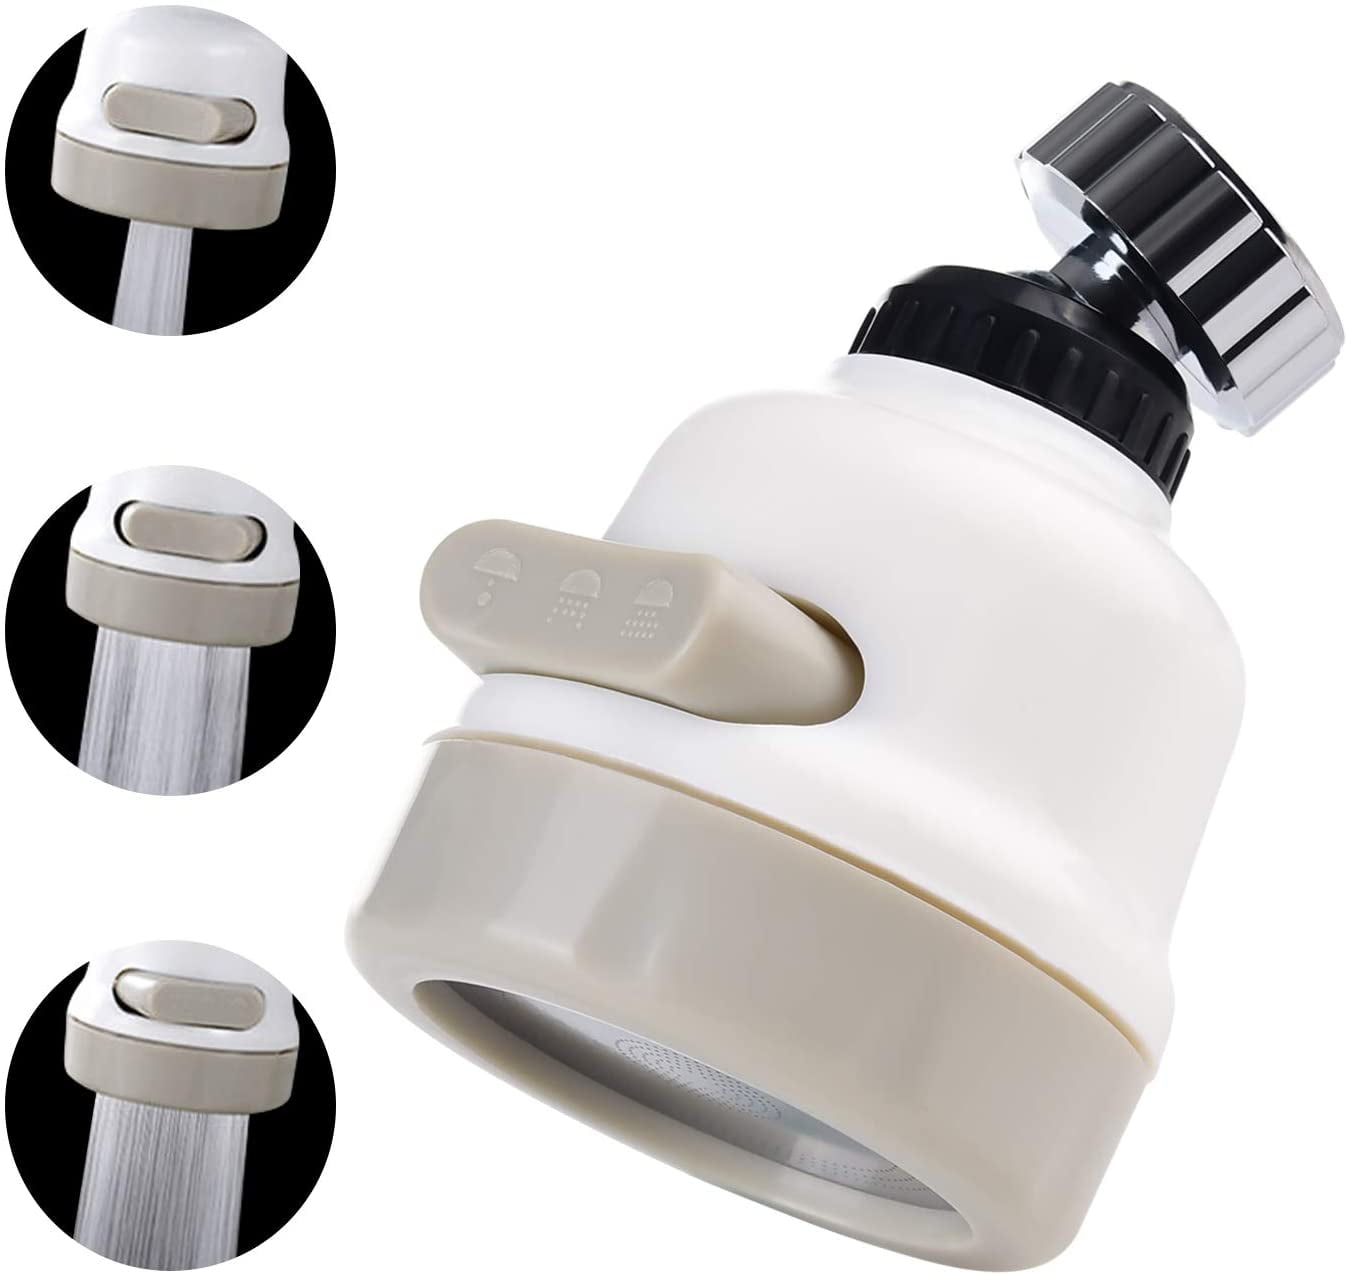 Faucets Nozzle Water Tap Attachment Sprayer Head Spray Aerator For Kitchen Sink 